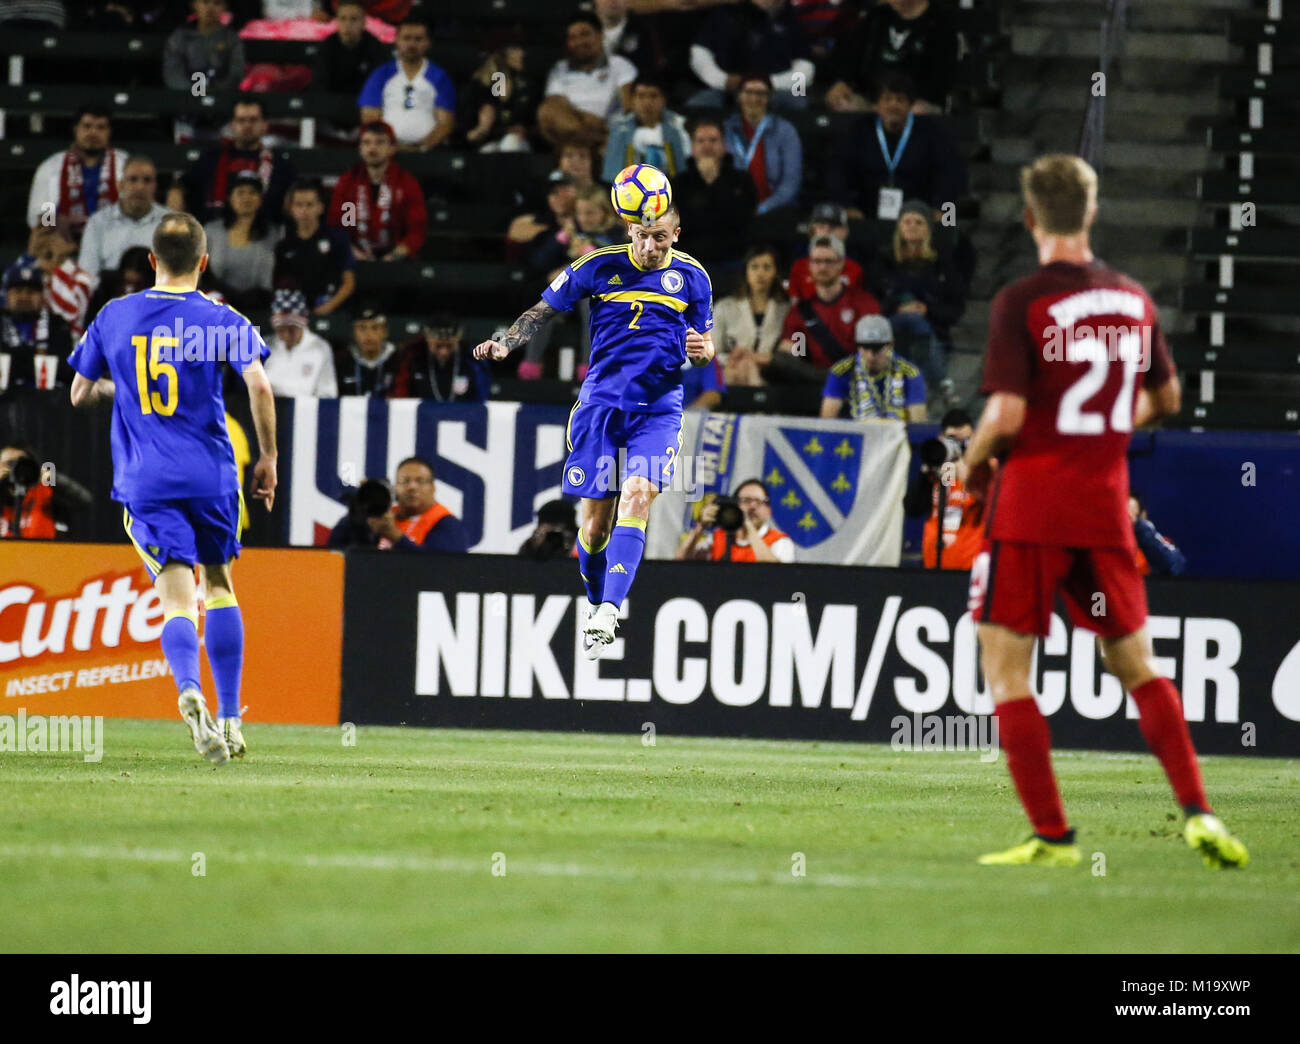 Los Angeles, California, USA. 25th Jan, 2018. Bosnia and Herzegovina's defender Almir Bekic #2 in actions during a men's national soccer team international friendly match between United States and Bosnia and Herzegovina, Jan. 28, 2018, at StubHub Center in Carson, California. The game ended in a 0-0 draw. Credit: Ringo Chiu/ZUMA Wire/Alamy Live News Stock Photo